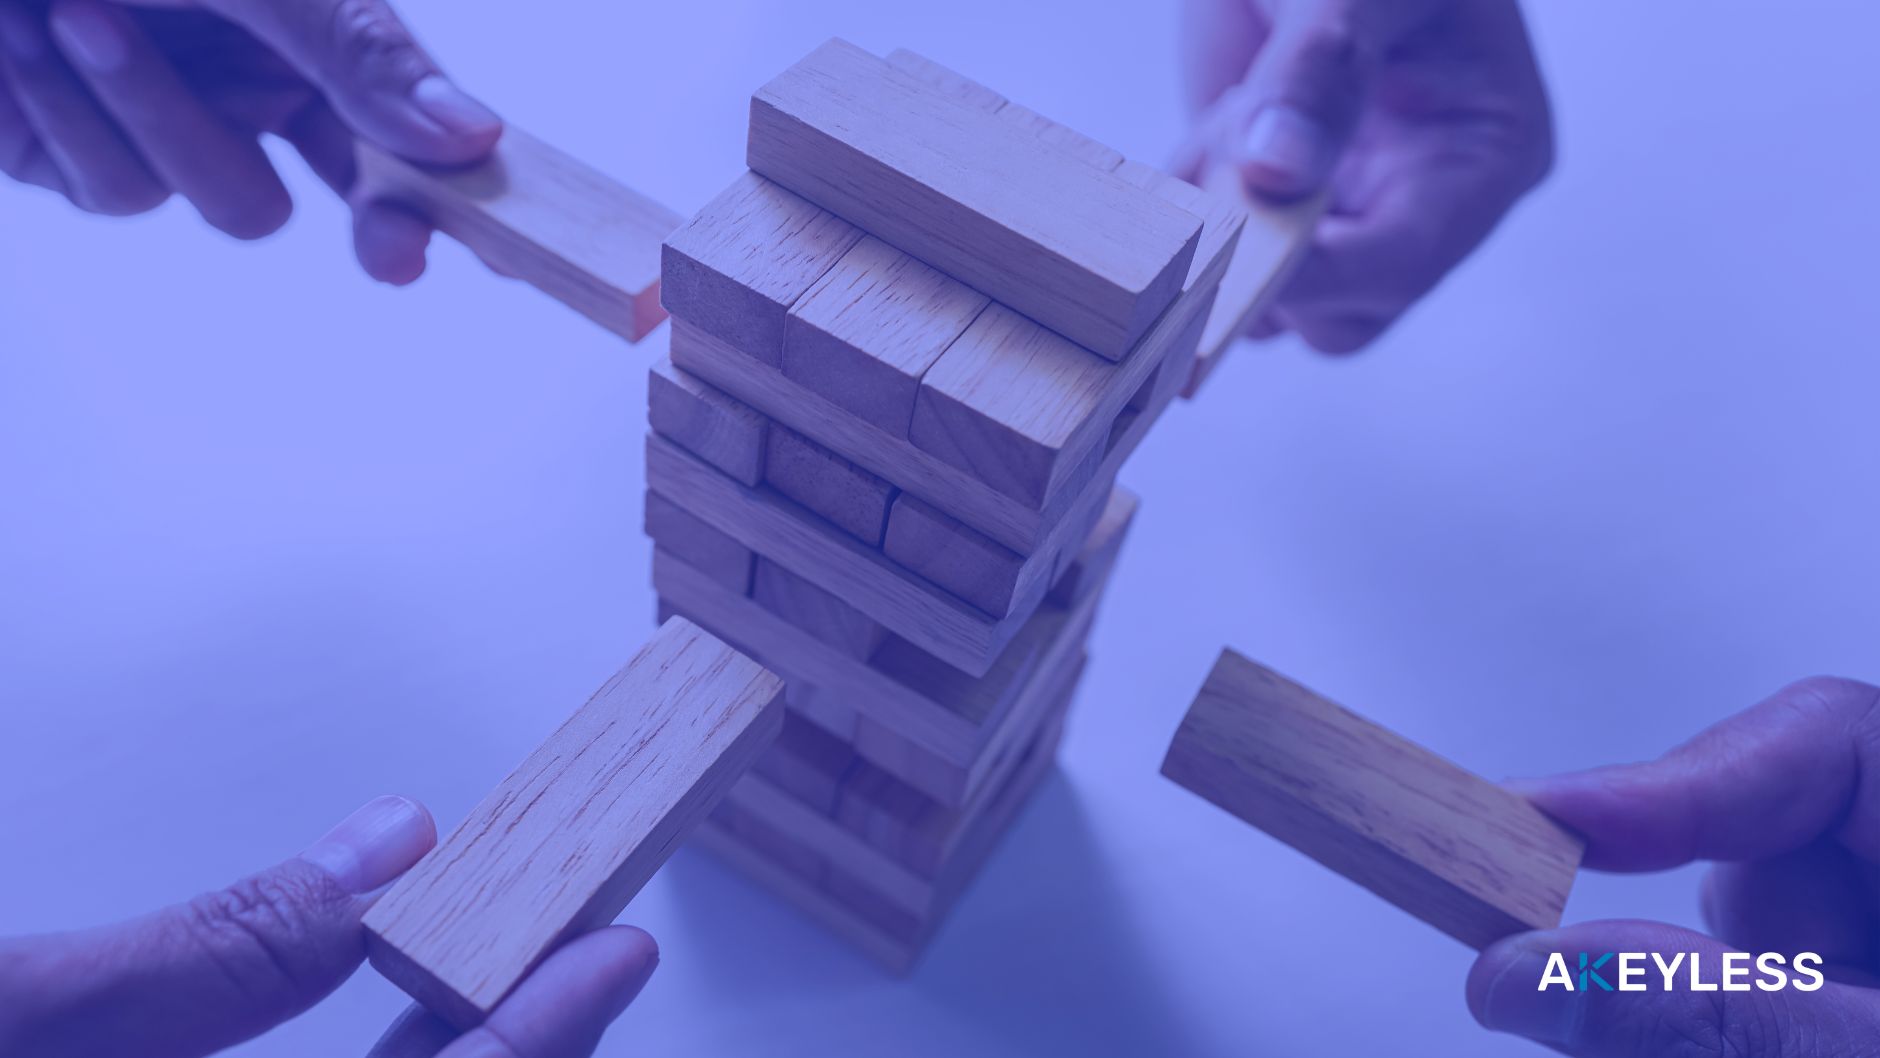 Secrets Management Debt: The Jenga Tower of Security